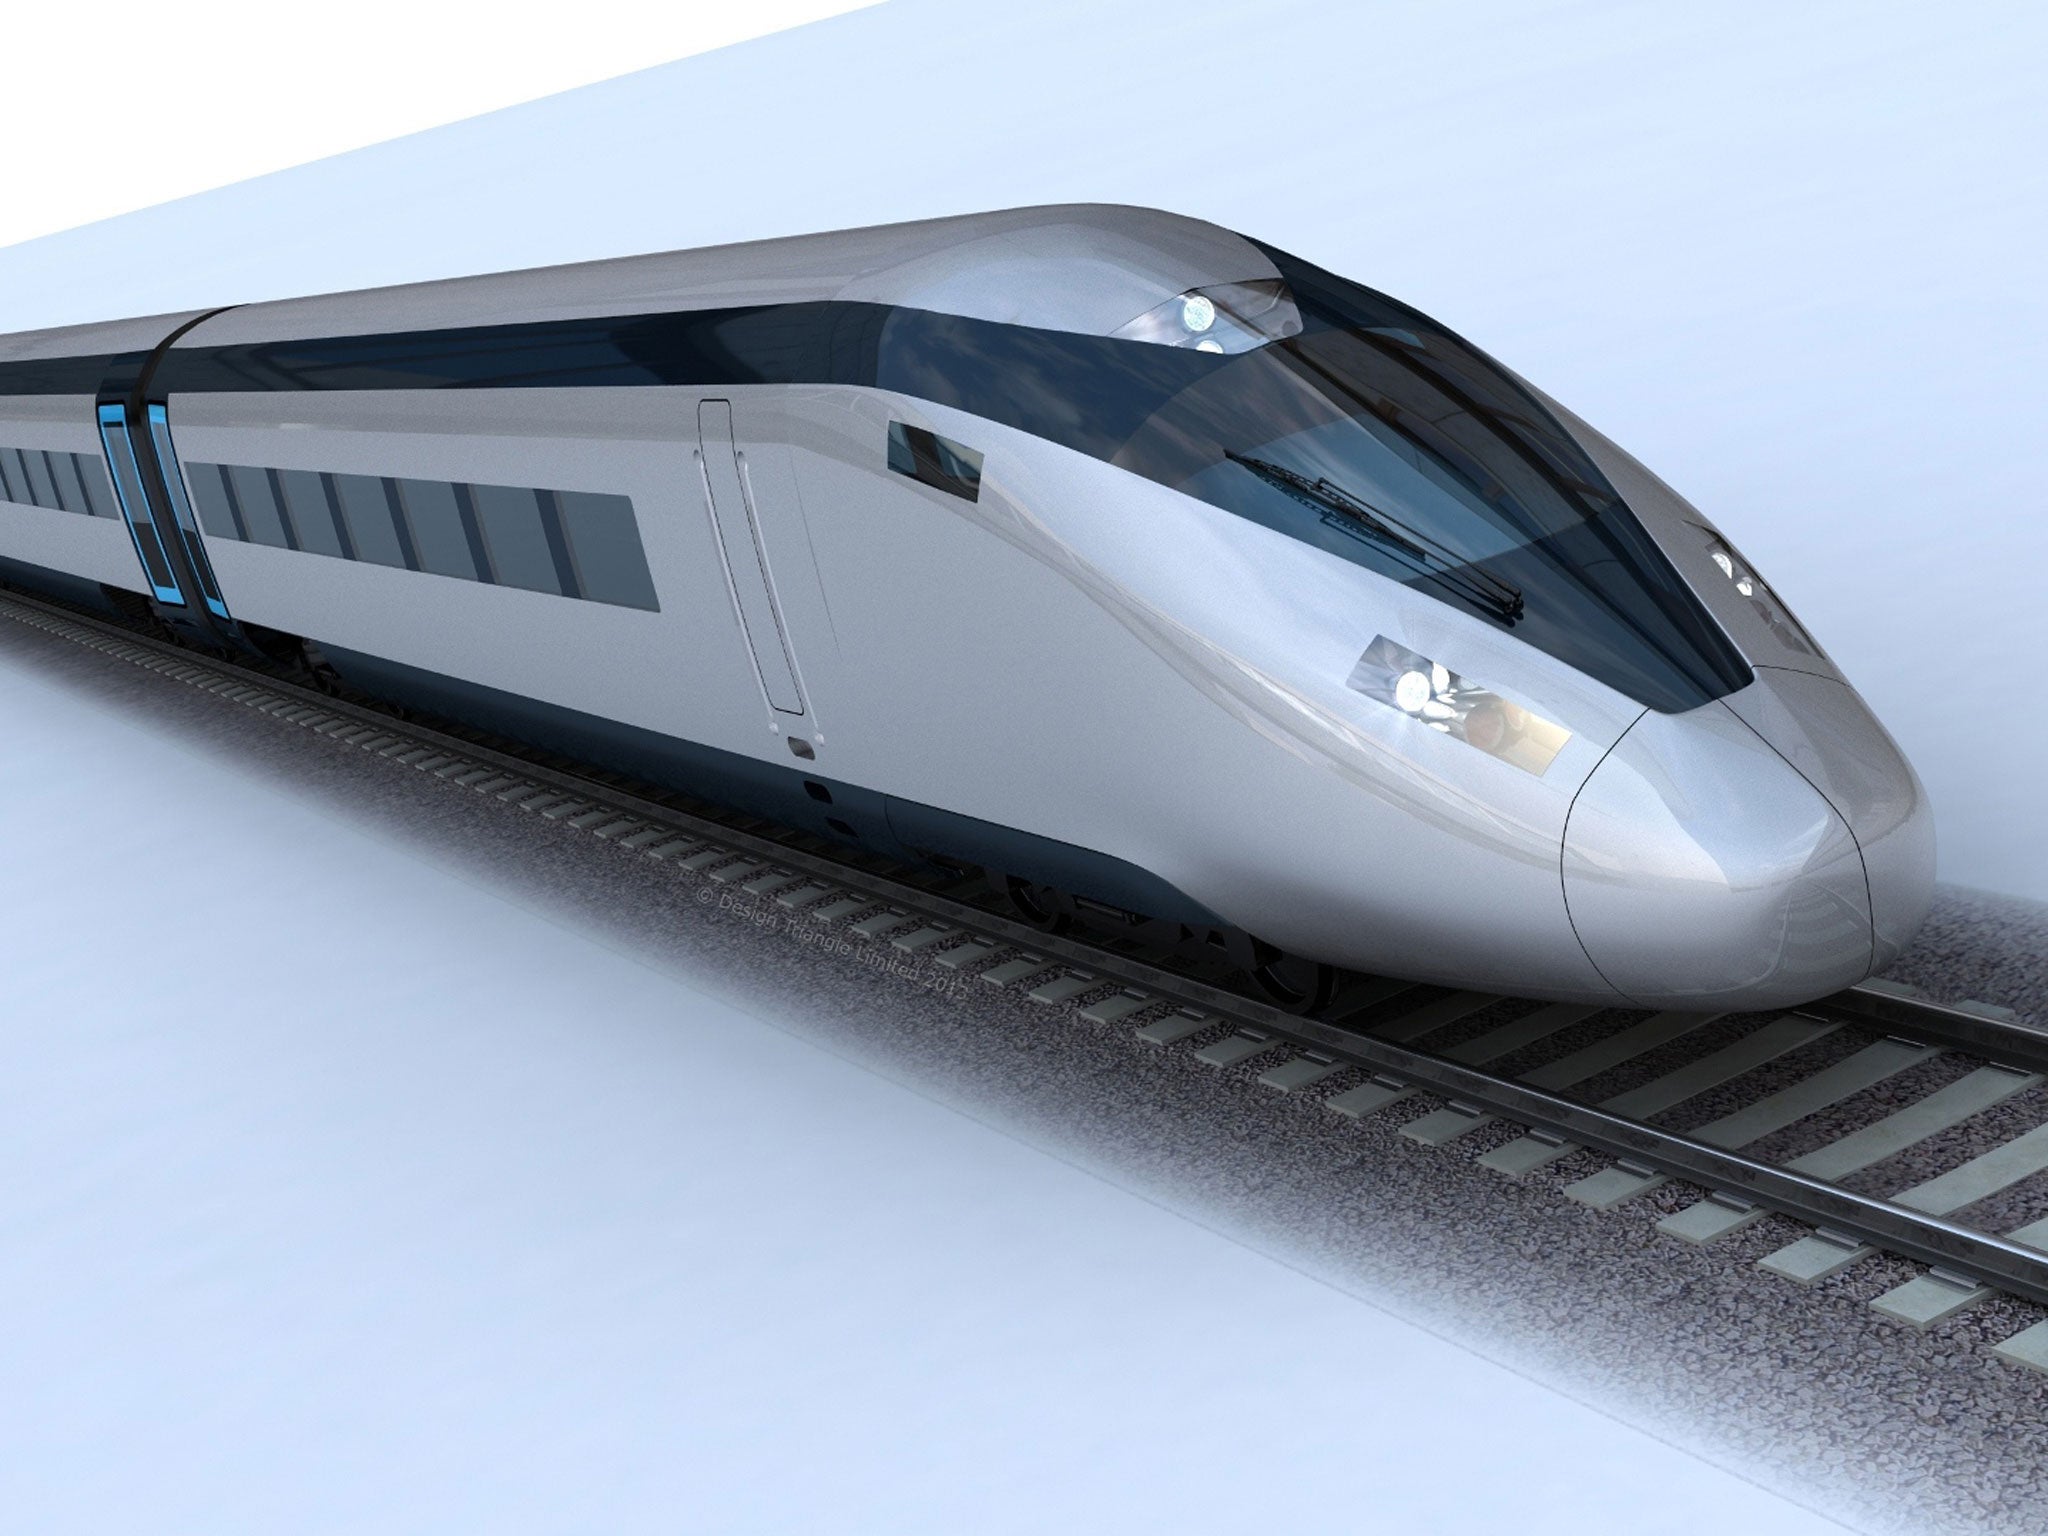 The future of the High Speed Rail 2 project looks in doubt as Labour prepare to stop backing it, and the Tory rebellion against it gathers momentum